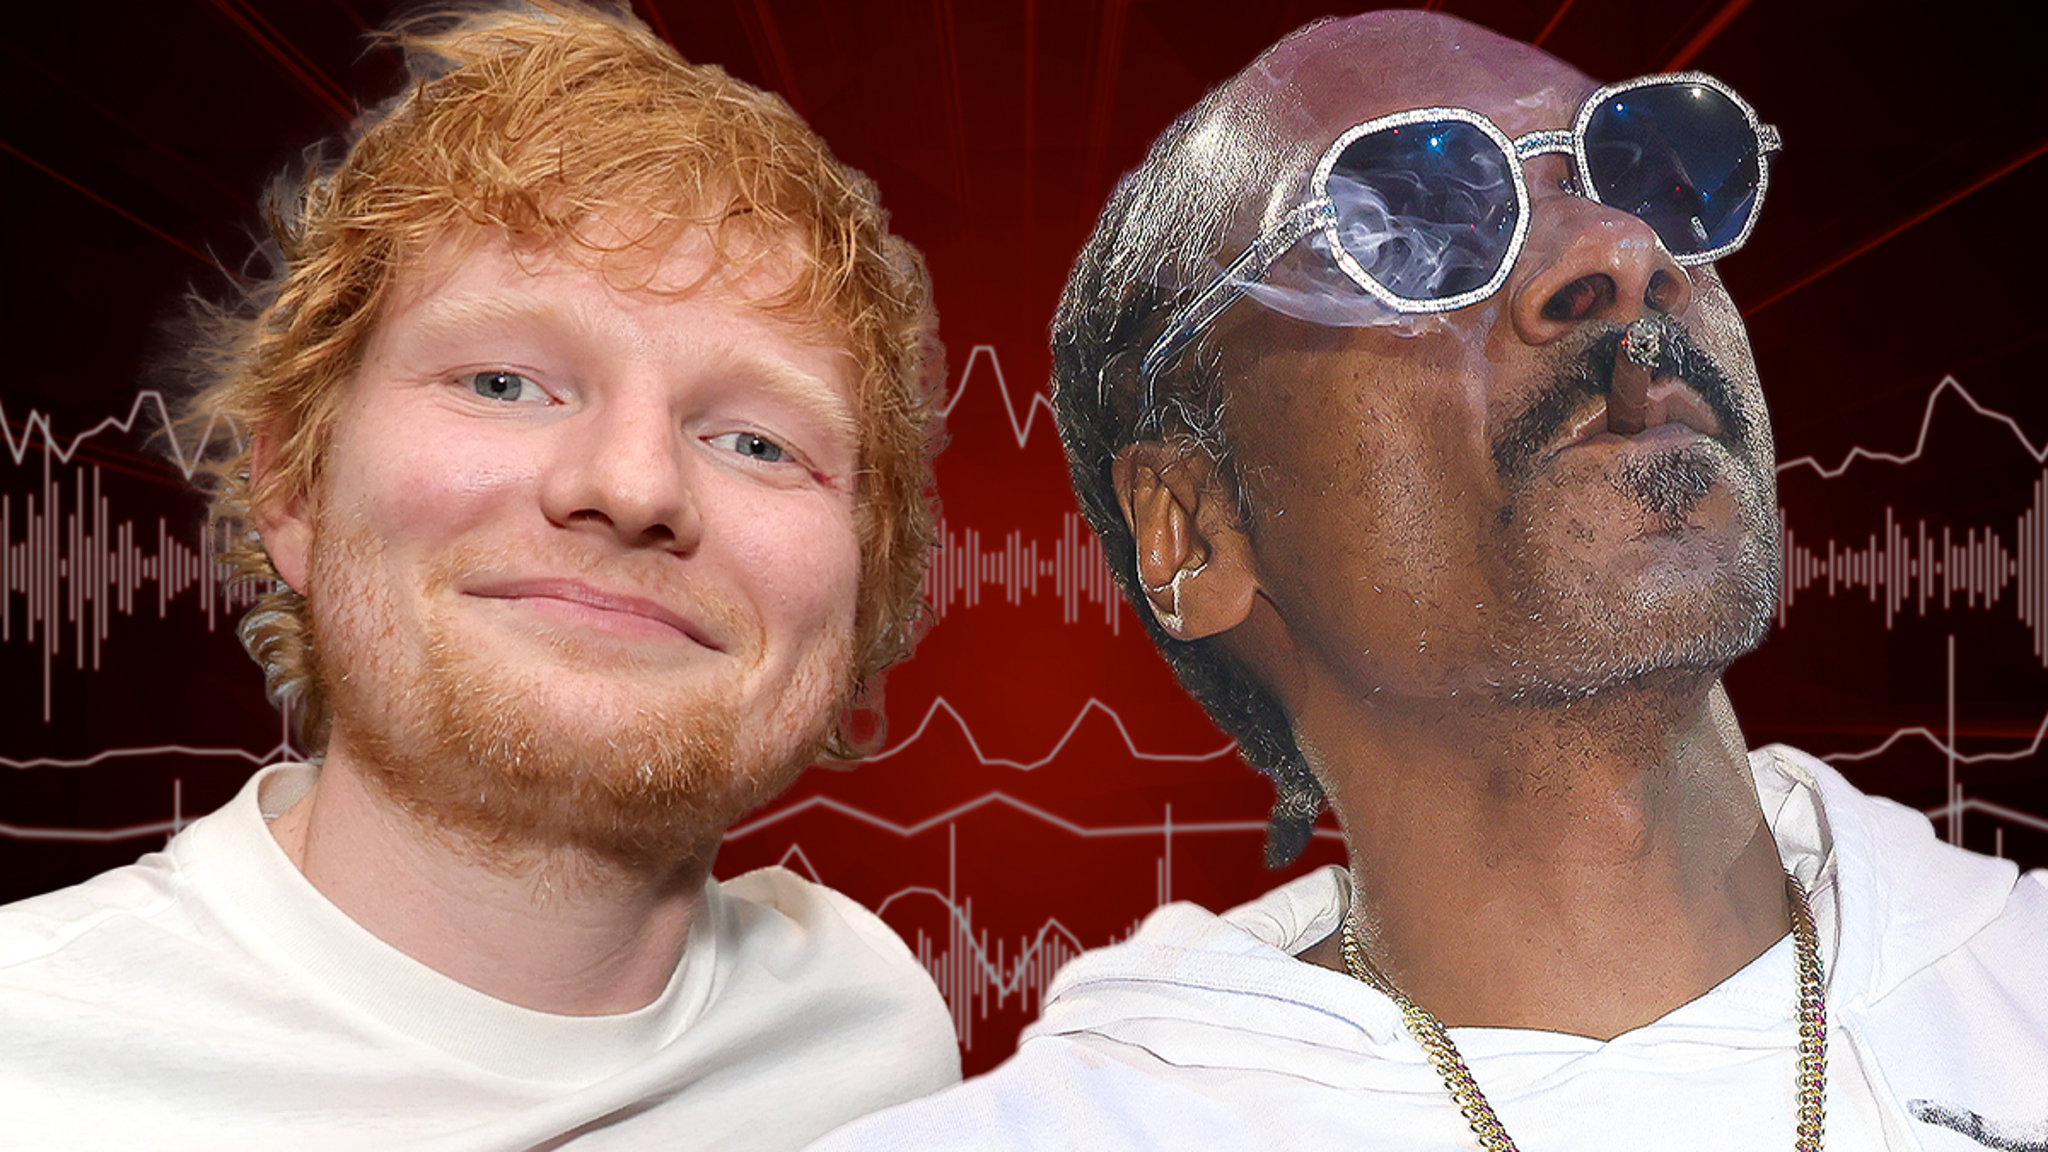 Ed Sheeran says Snoop Dogg got him so high he couldn't see clearly